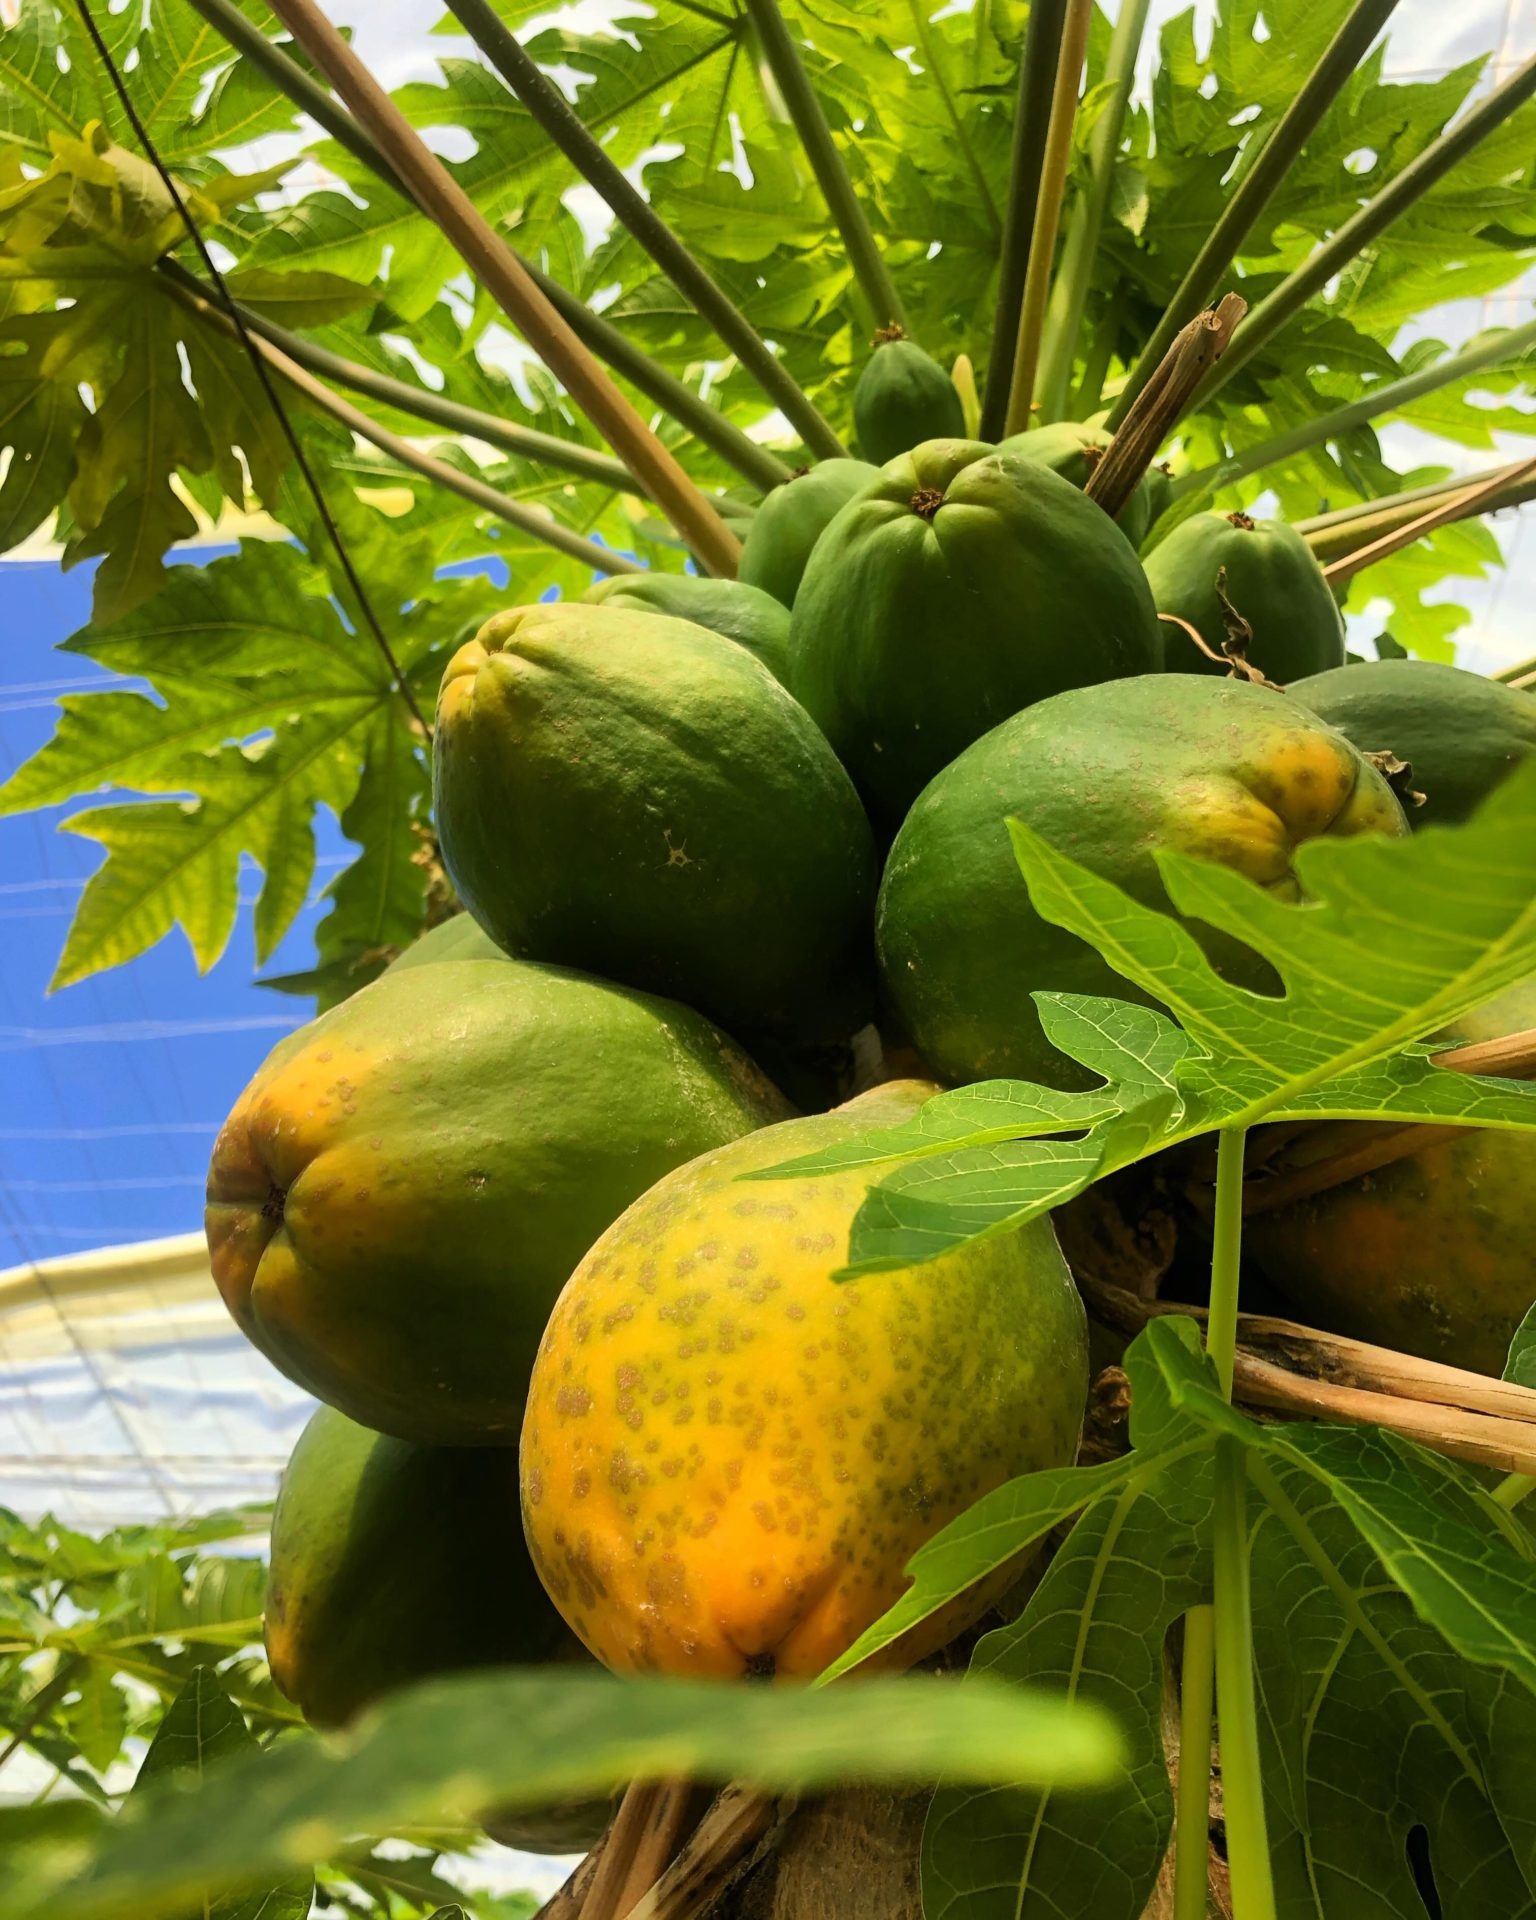 Papaya: Used in salads, pies, sherbets, juices, and confections. 1540x1920 HD Wallpaper.